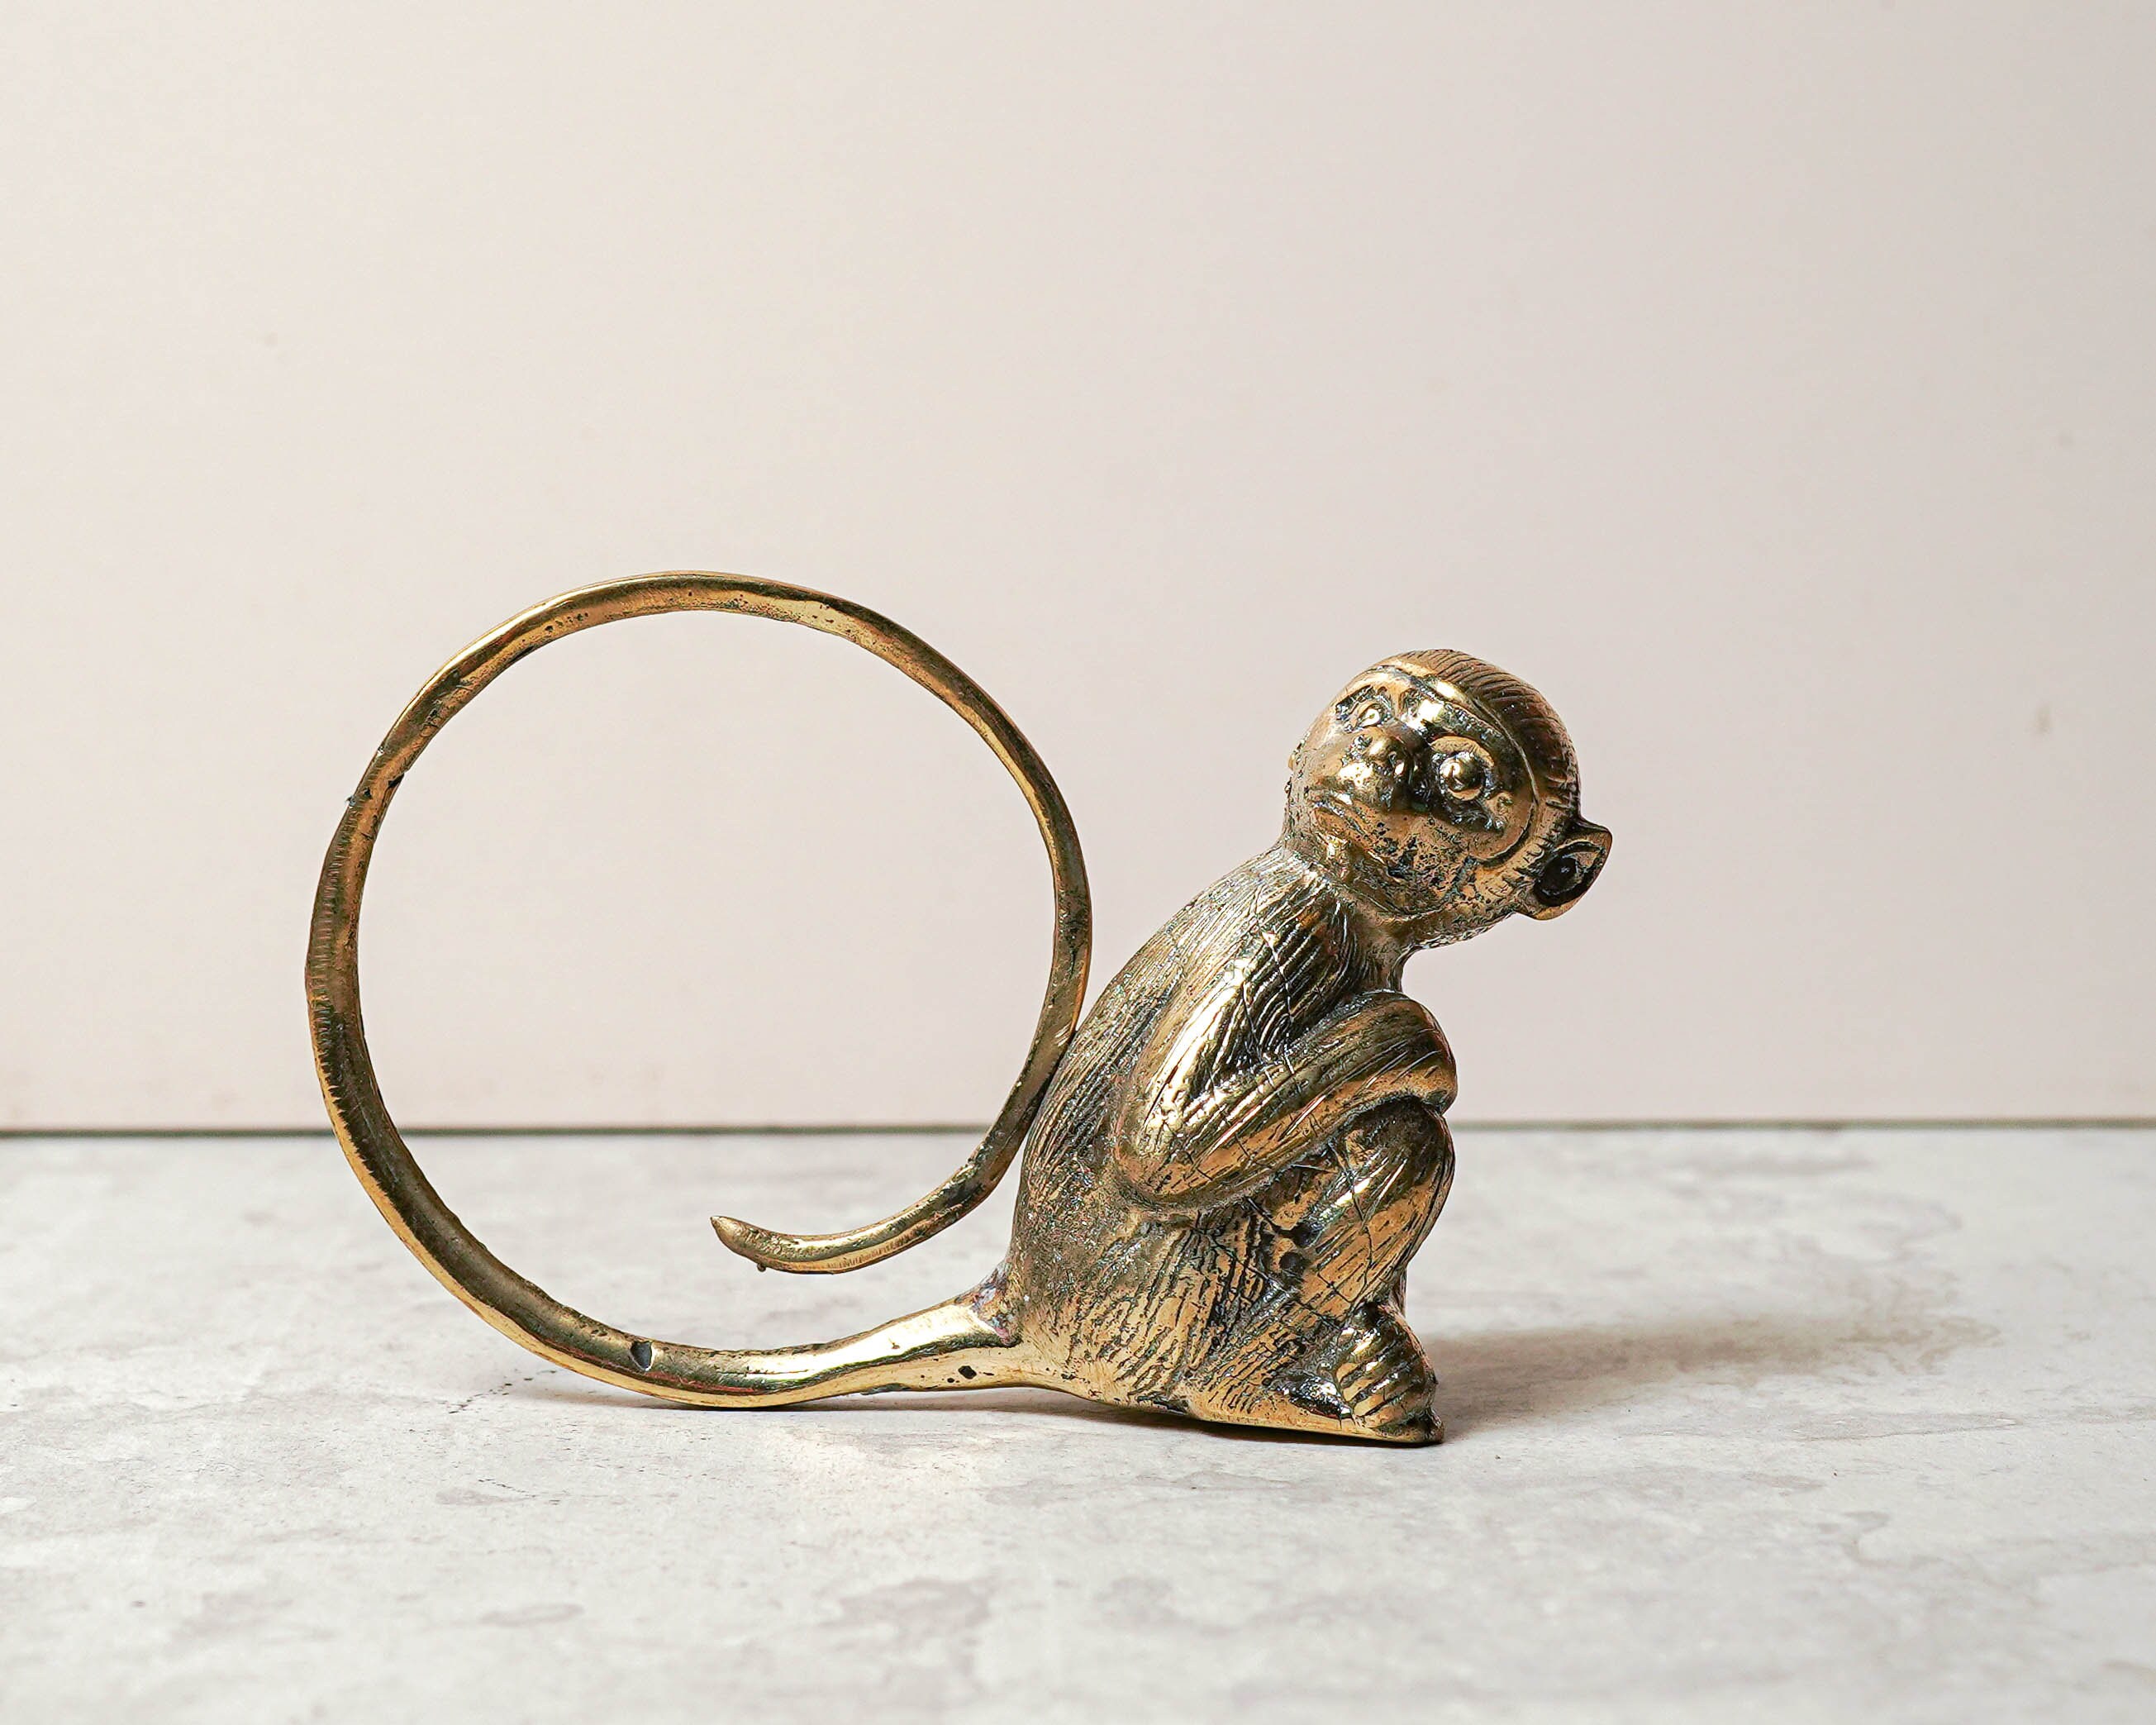 Solid Brass Monkey Statues - Set of 3